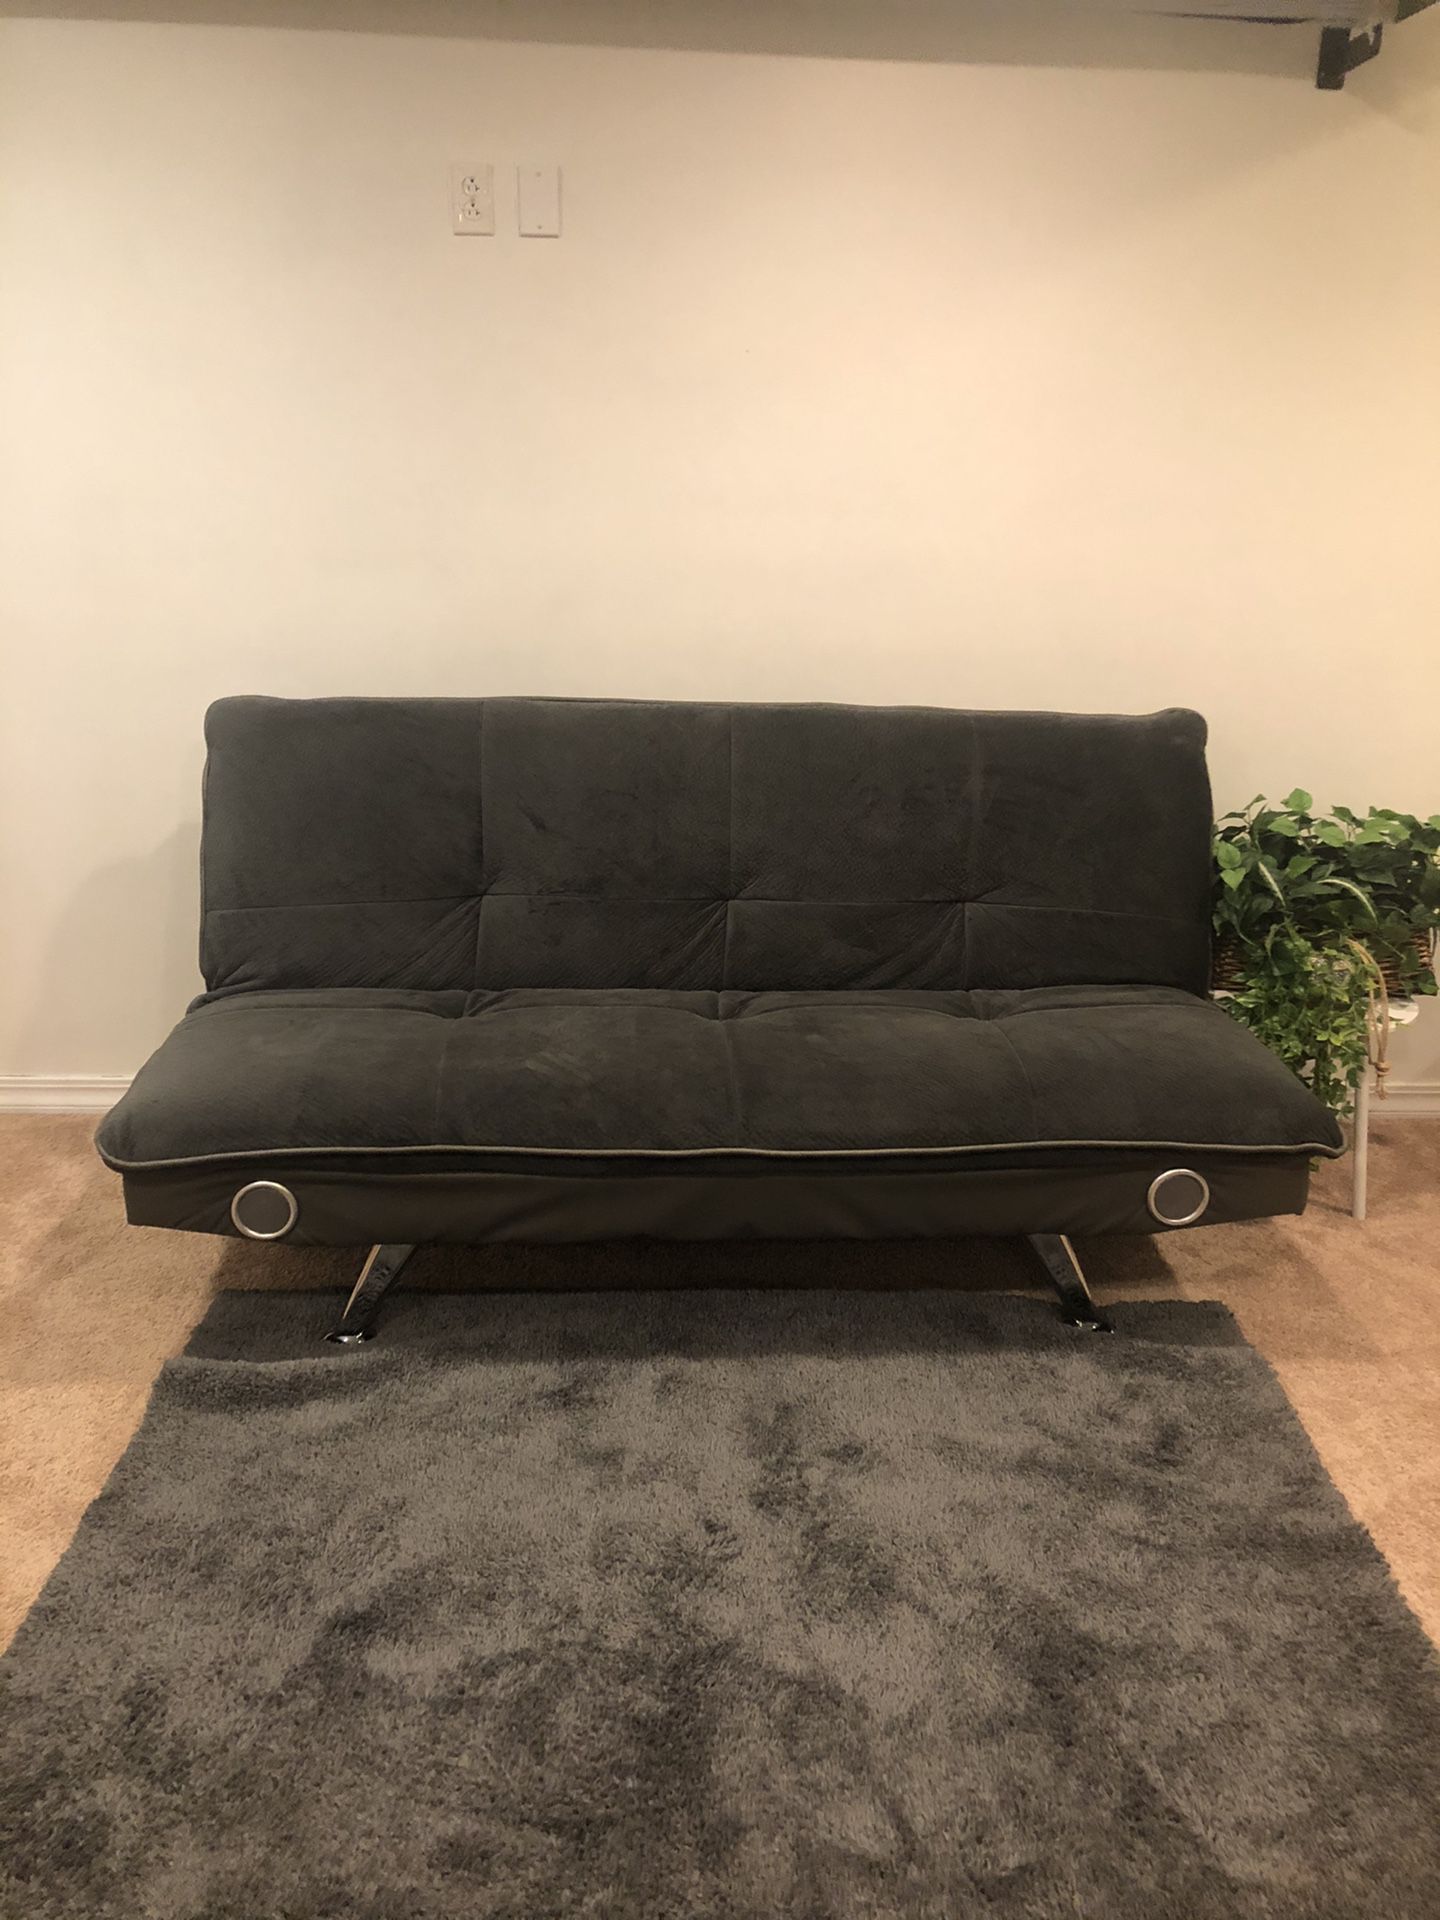 Couch - Bed